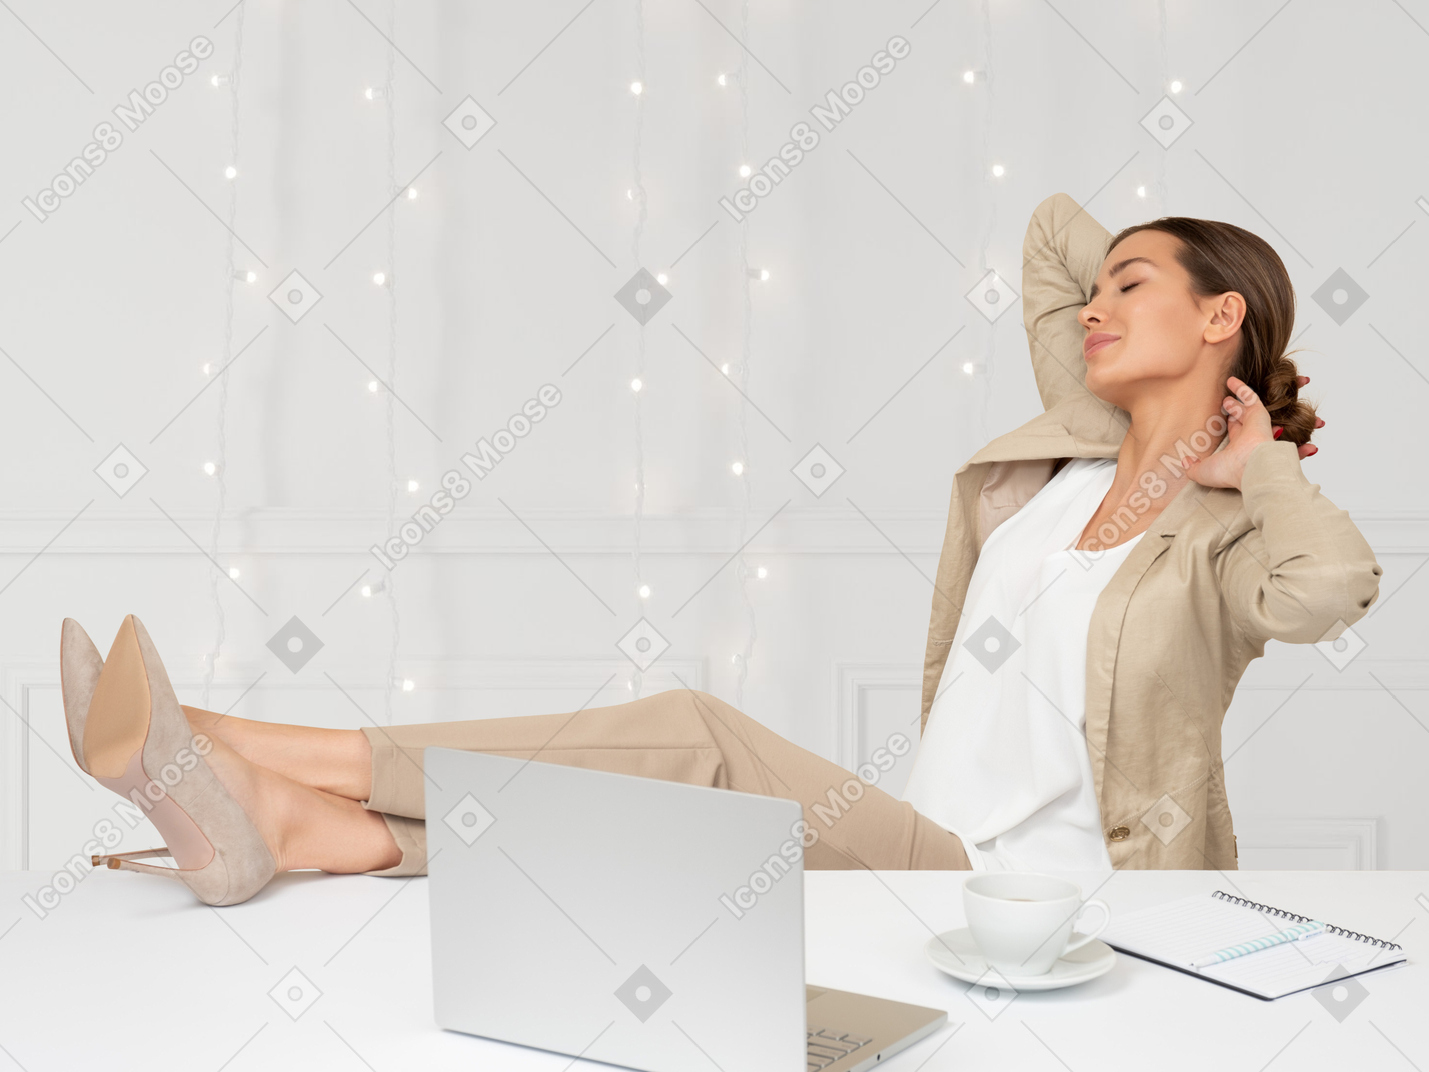 Young woman stretching in the office decorated for christmas